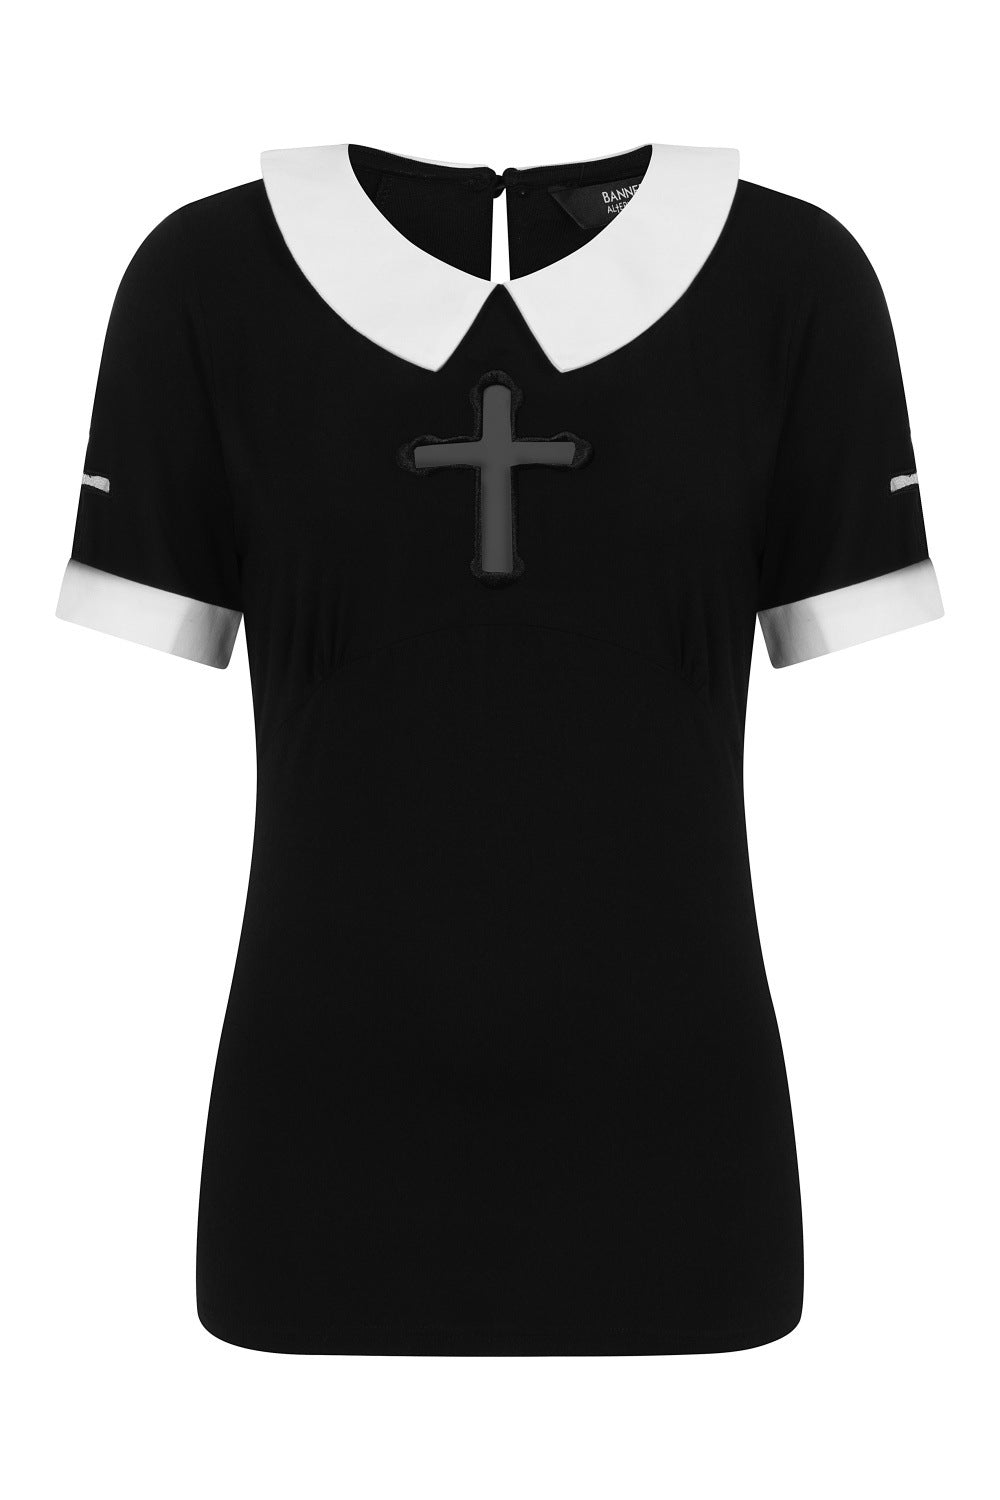 Black short sleeved top with white collar and sleeve cuffs. Cross mesh panel on the chest.